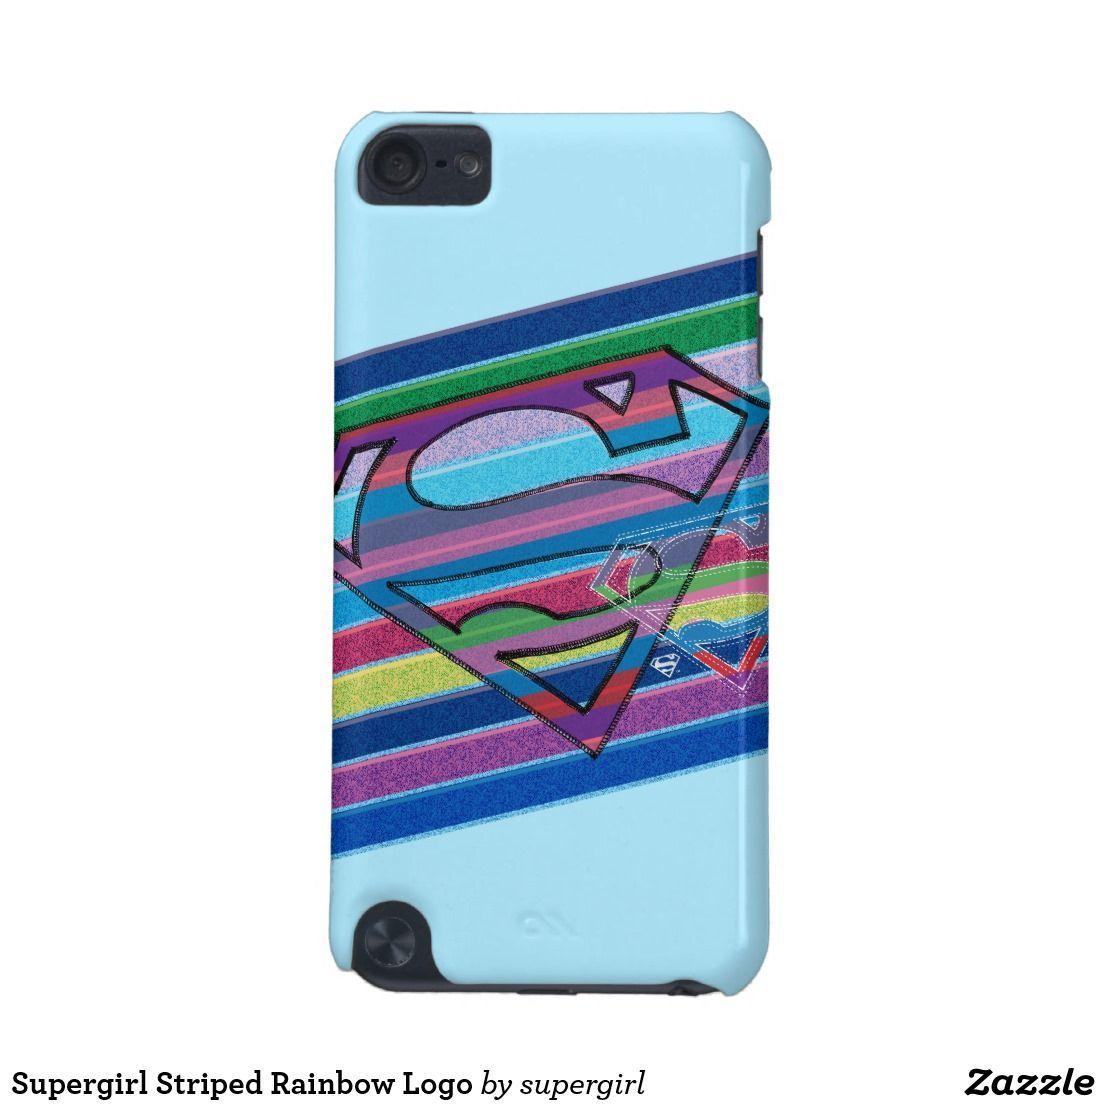 5th Comic Book Style Logo - Supergirl Striped Rainbow Logo iPod Touch (5th Generation) Cover